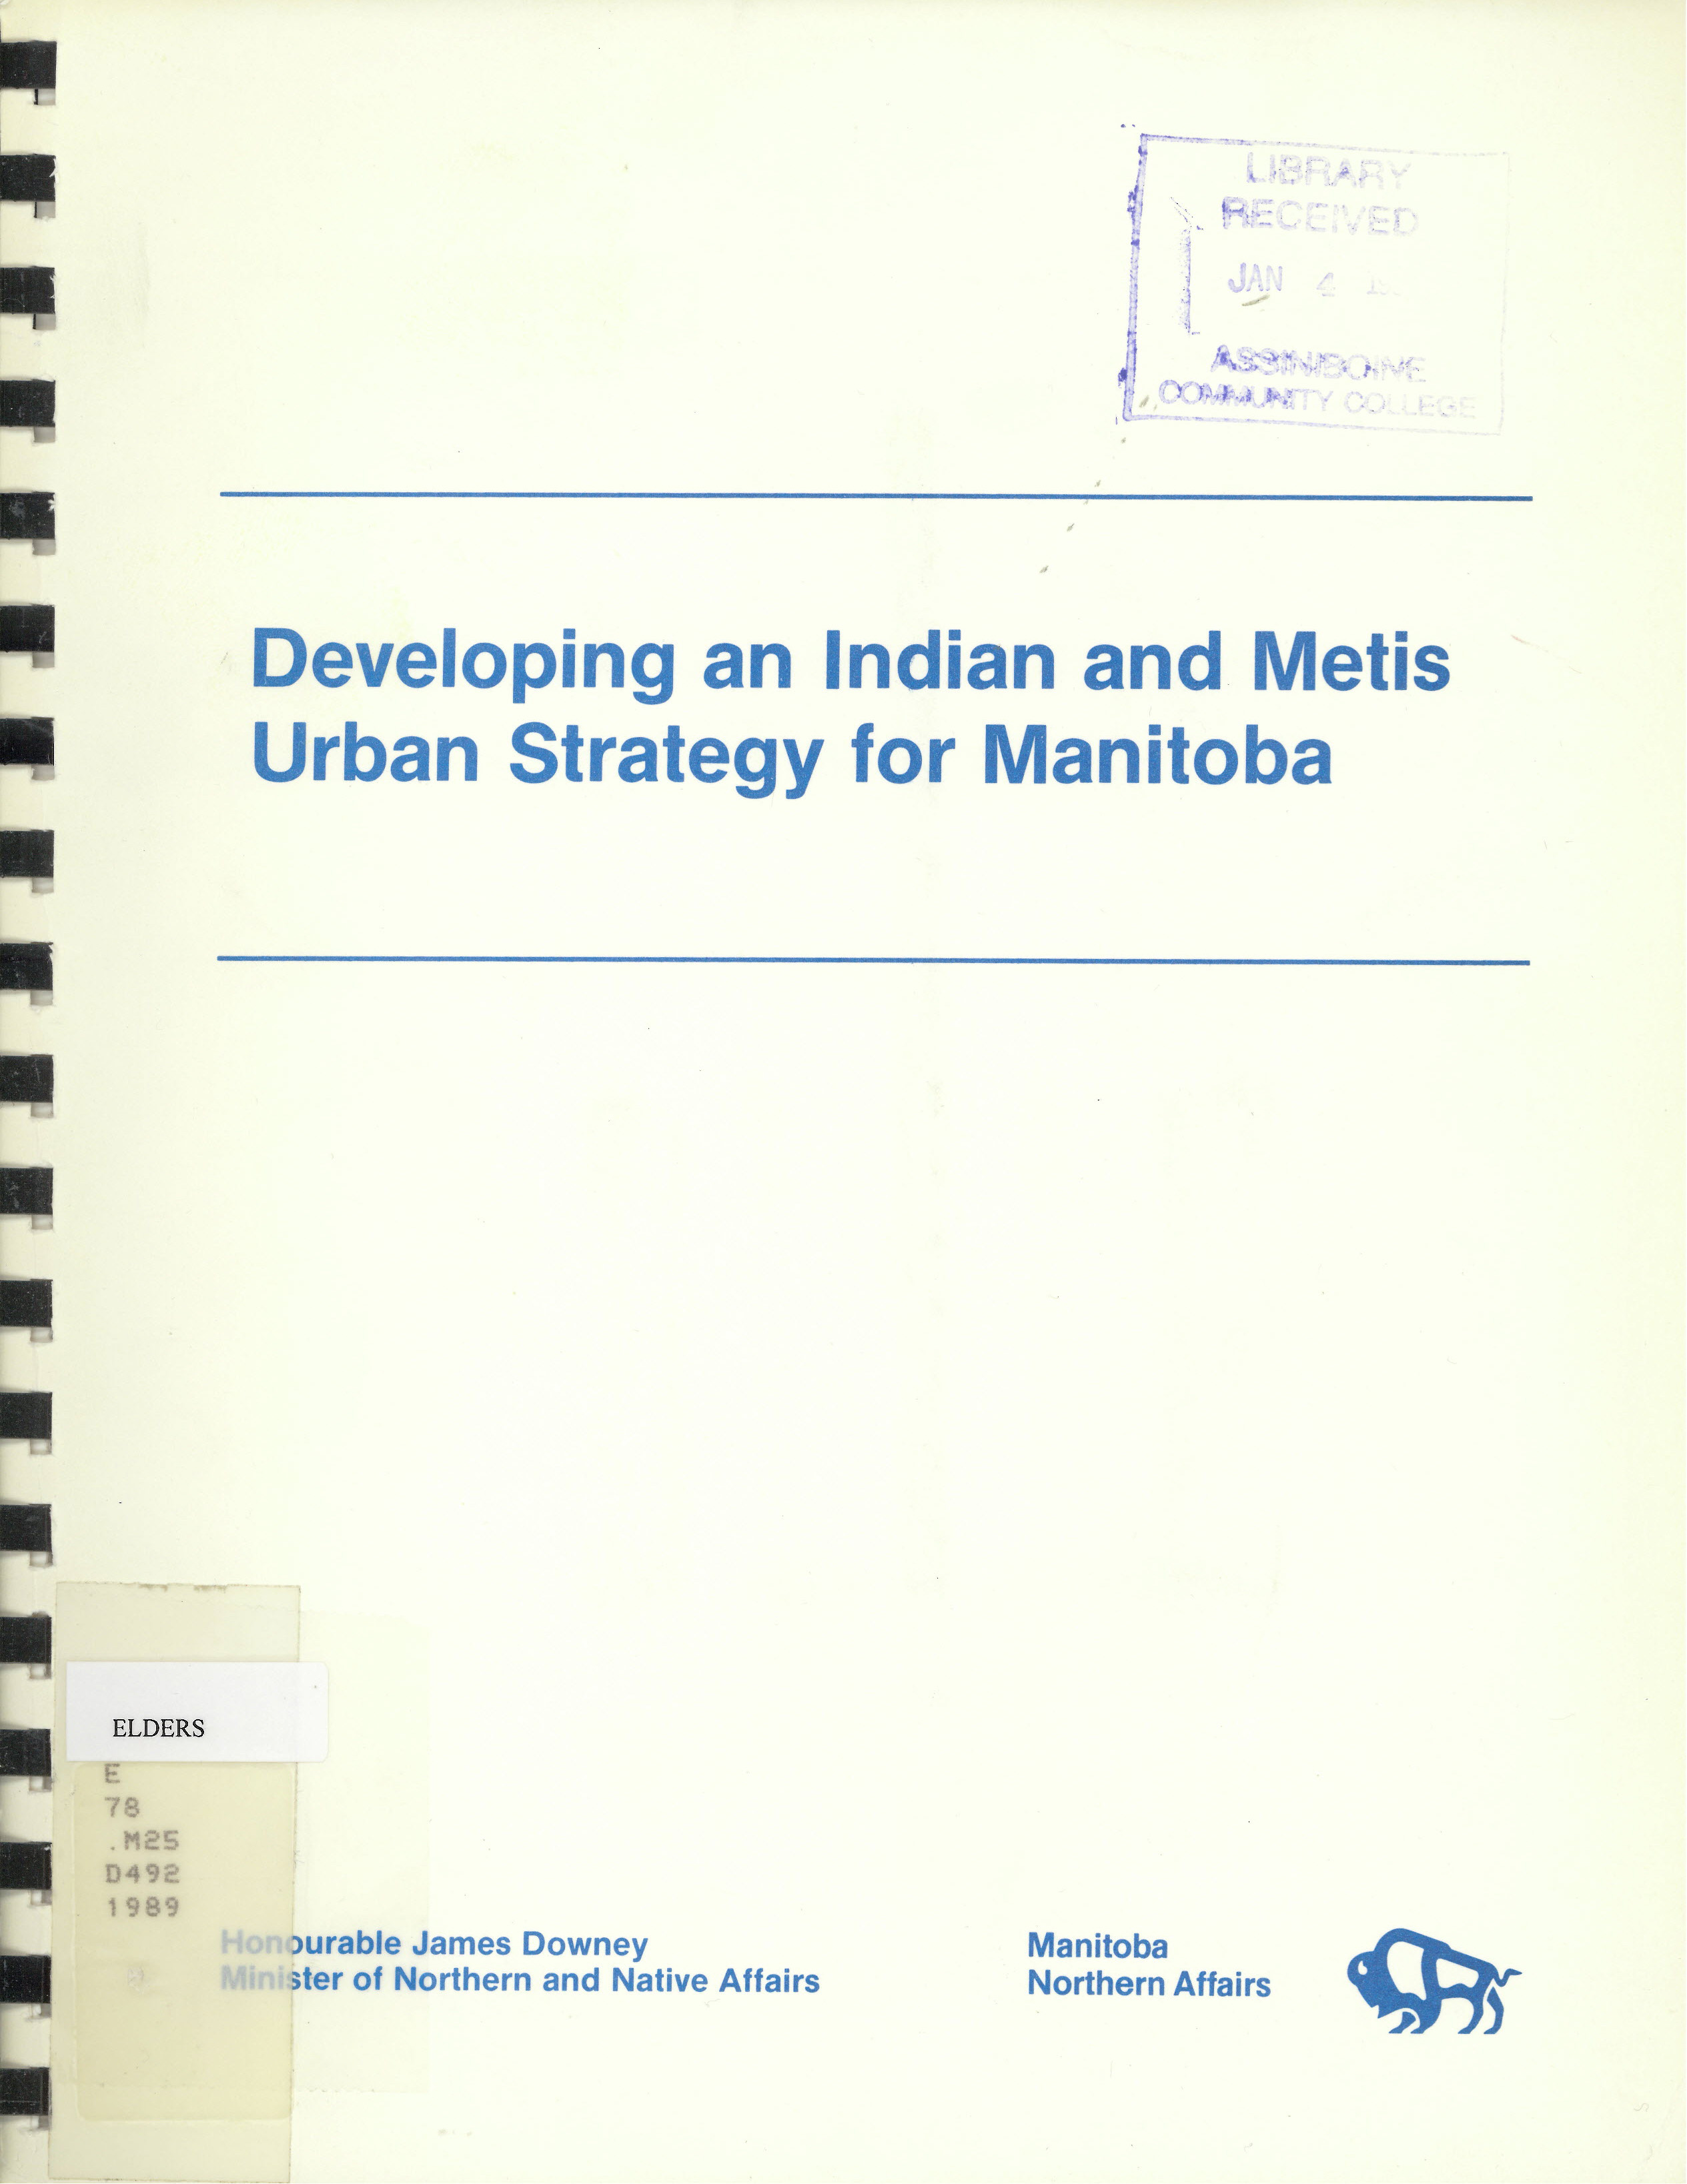 Developing an Indian and Metis urban strategy for Manitoba